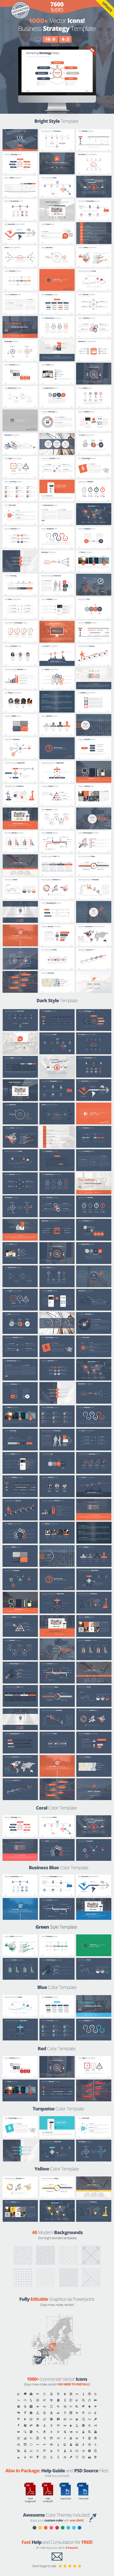 Business Strategy Google Slides Template